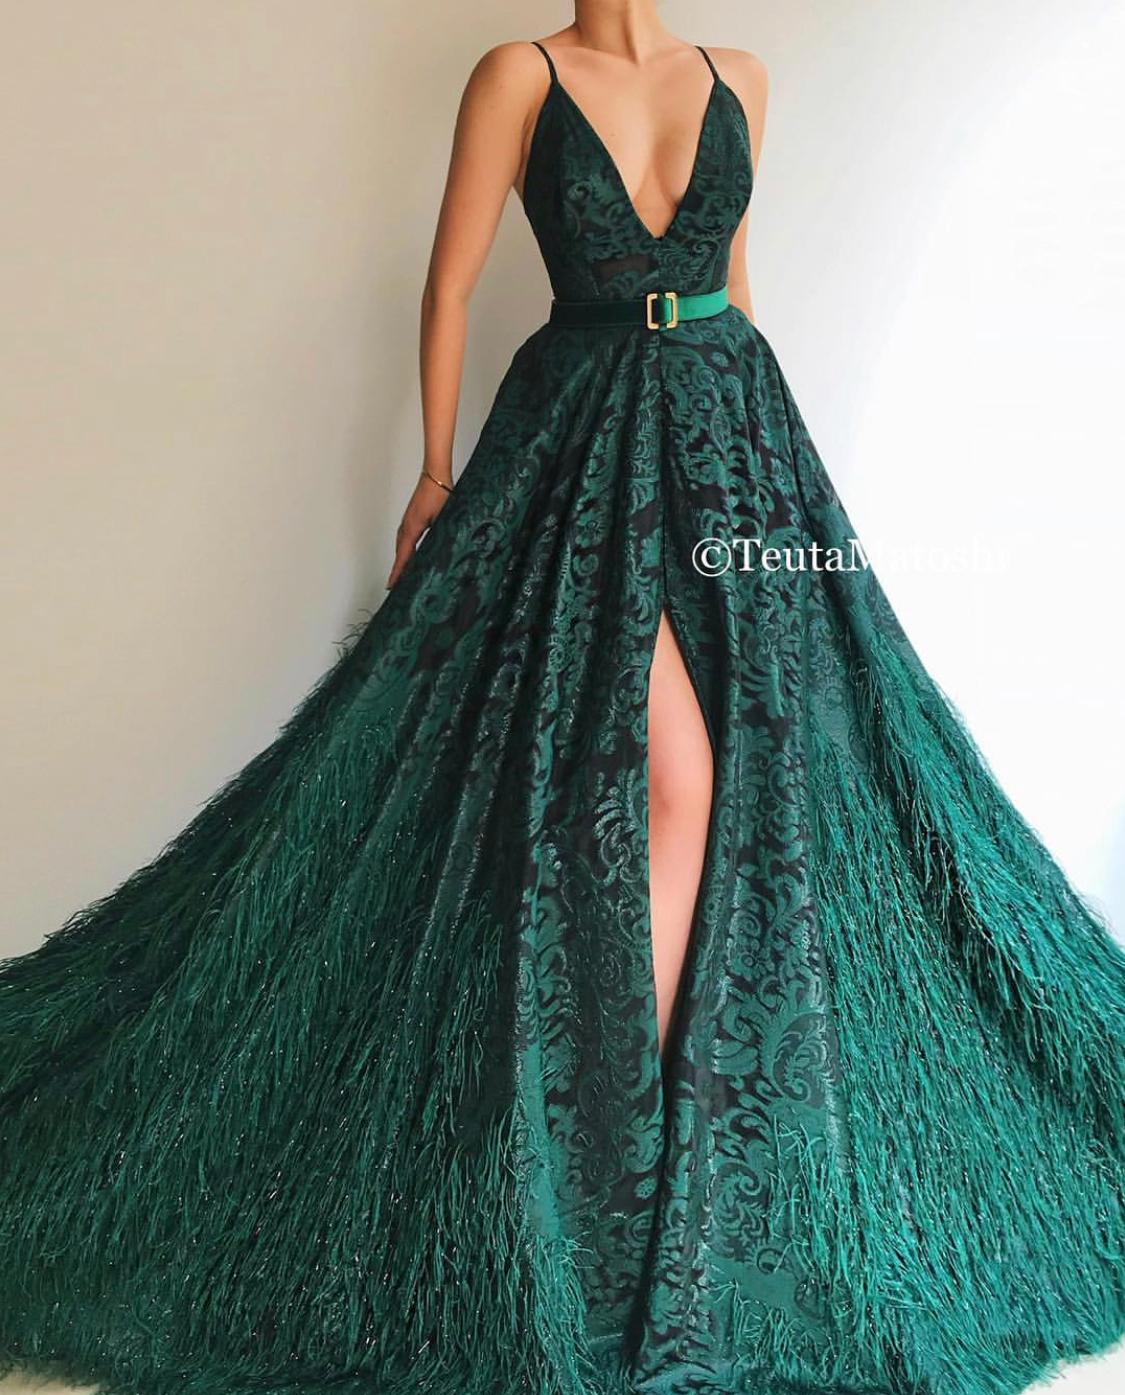 Green A-Line dress with lace, spaghetti straps, v-neck and belt